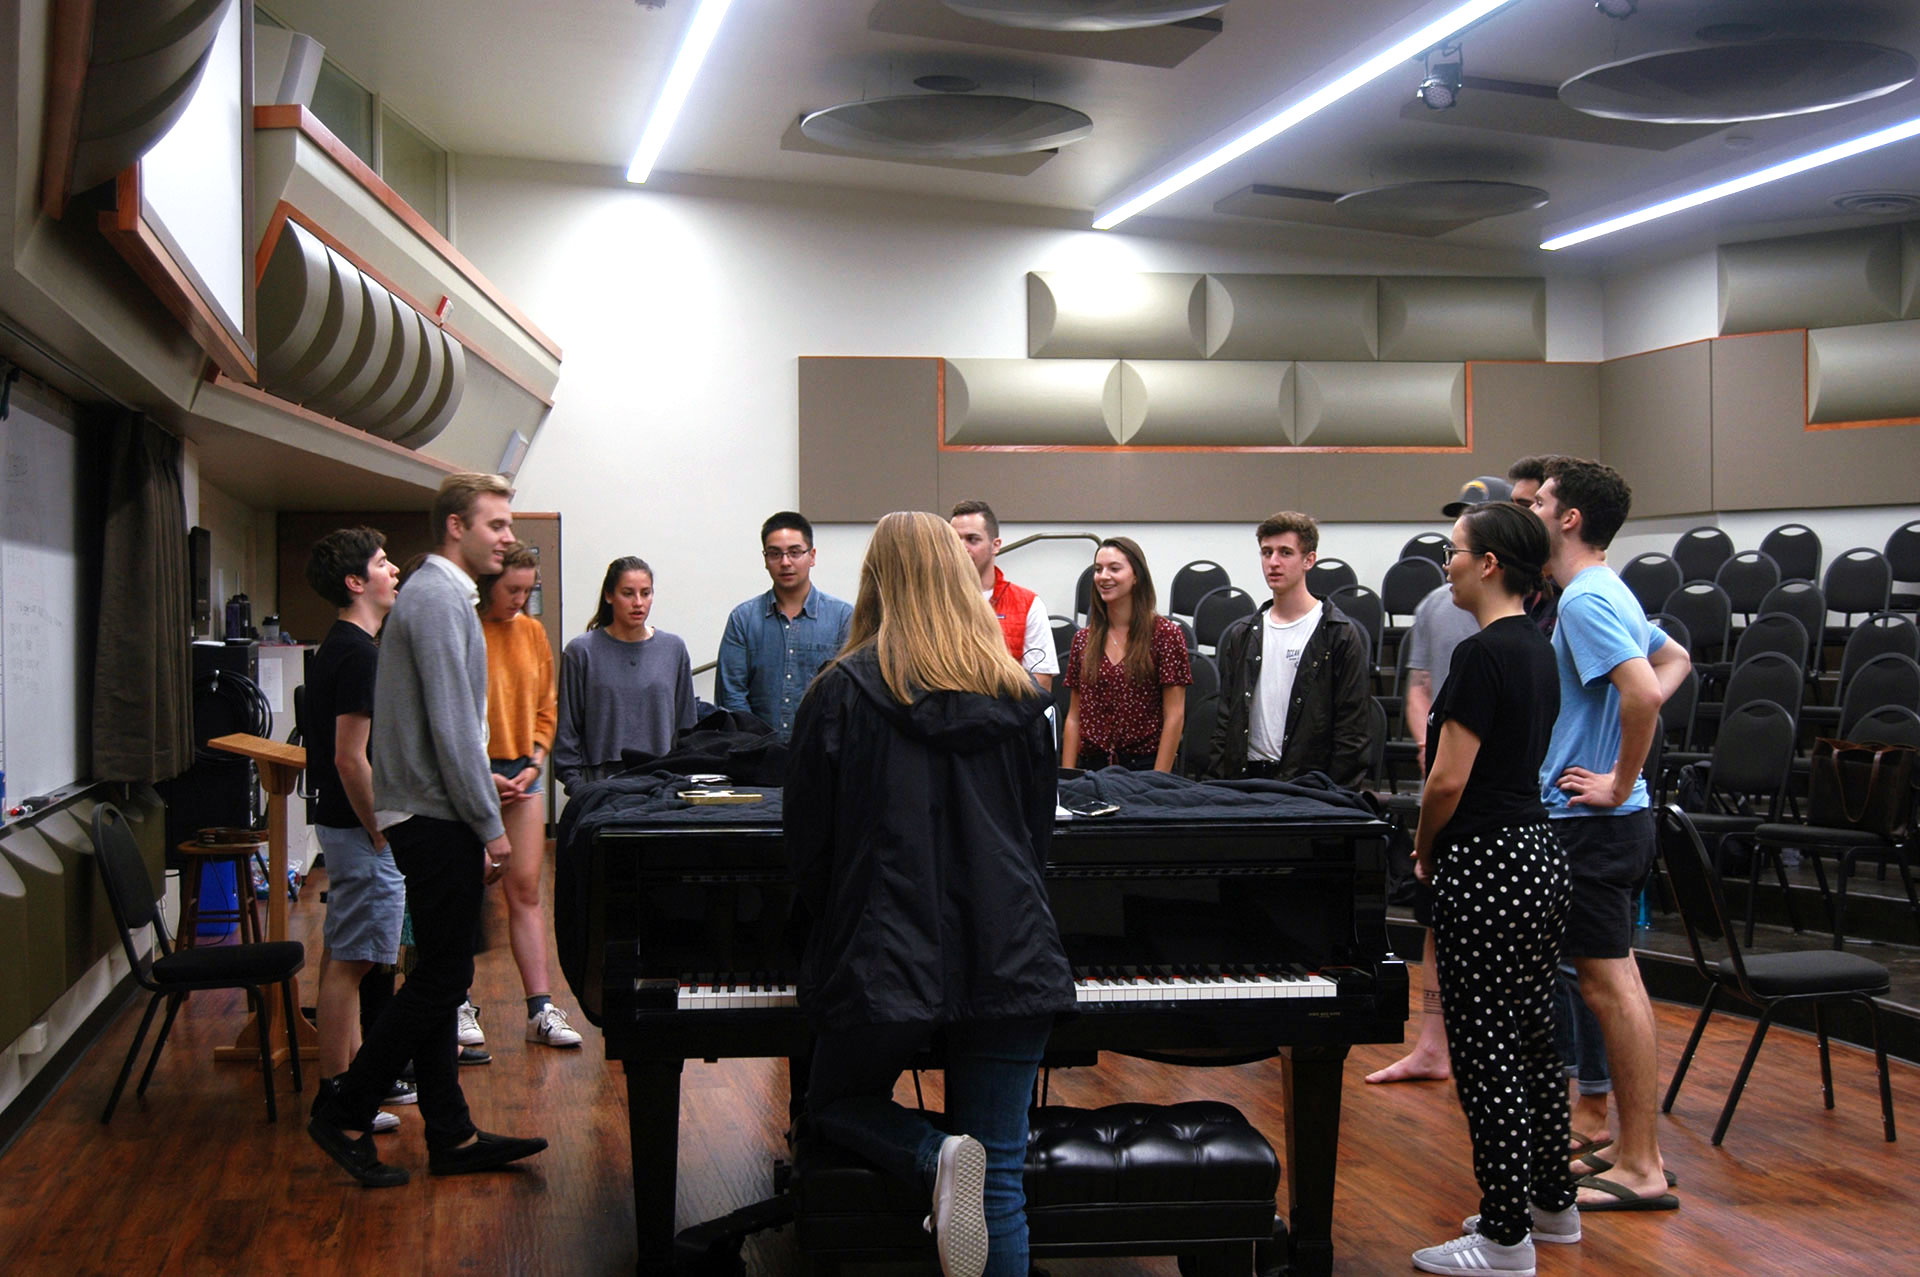 October 8, 2017 | San Luis Obispo, CA | Music sophomore Molly Gooch (center) proceeds to
conduct the rehearsal, playing four notes in the lower register of the piano. She’s reminding the
basses how their opening part sounds so that they may begin singing “Surfer Girl” by The
Beach Boys. “Surfer Girl” is one tune in a set of almost ten songs that the group will perform at
their winter concert (and subsequent gigs.)